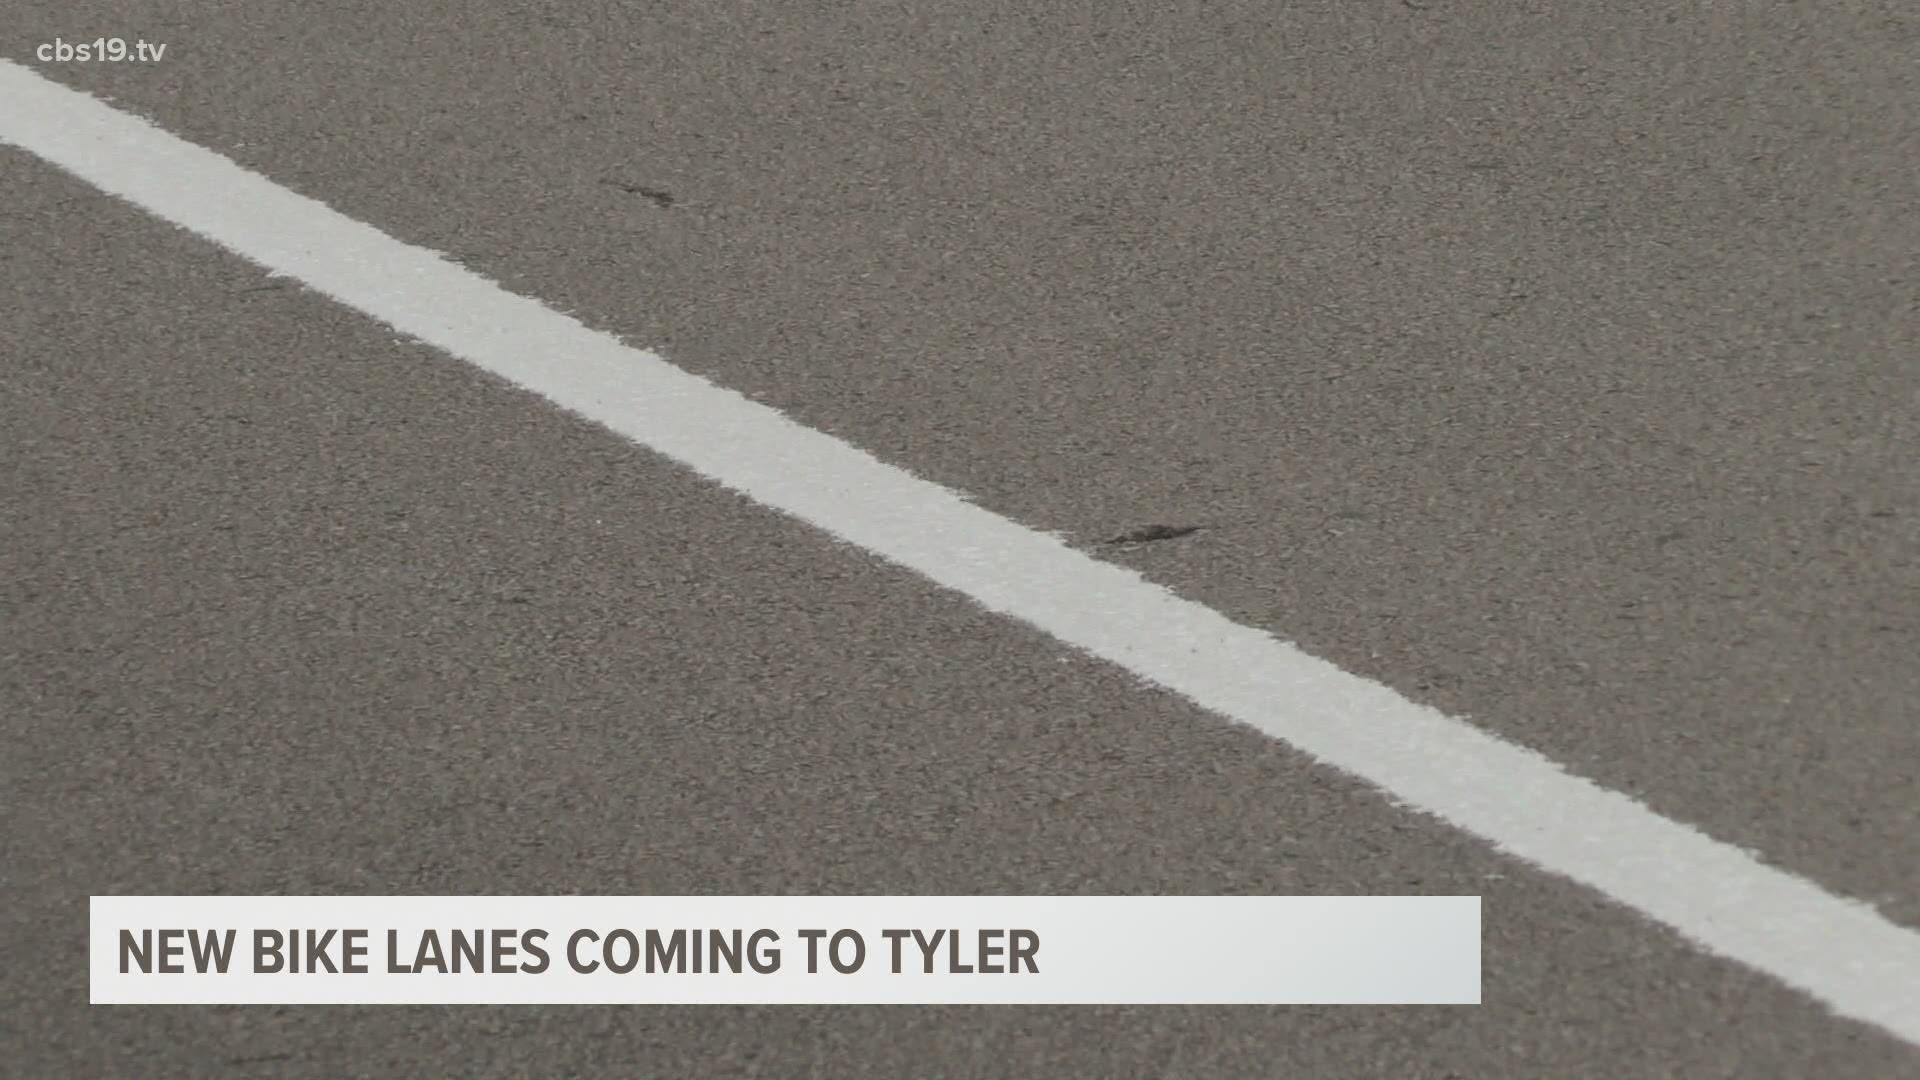 Tyler Bike Stripes Project aims to make the roadways more accessible to bicyclists.